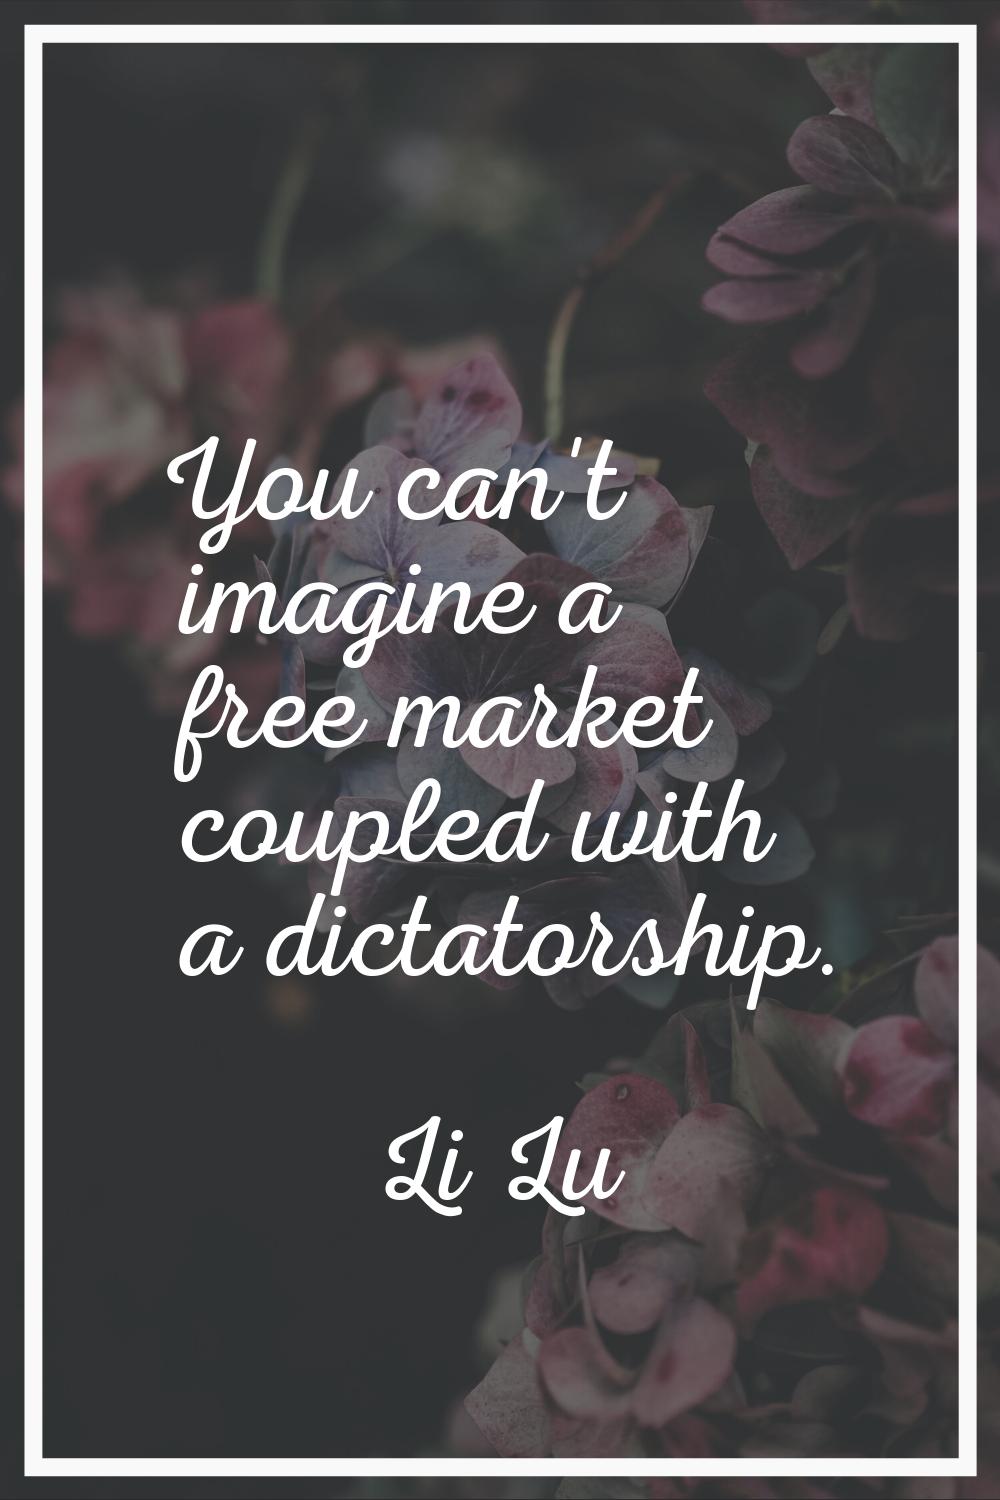 You can't imagine a free market coupled with a dictatorship.